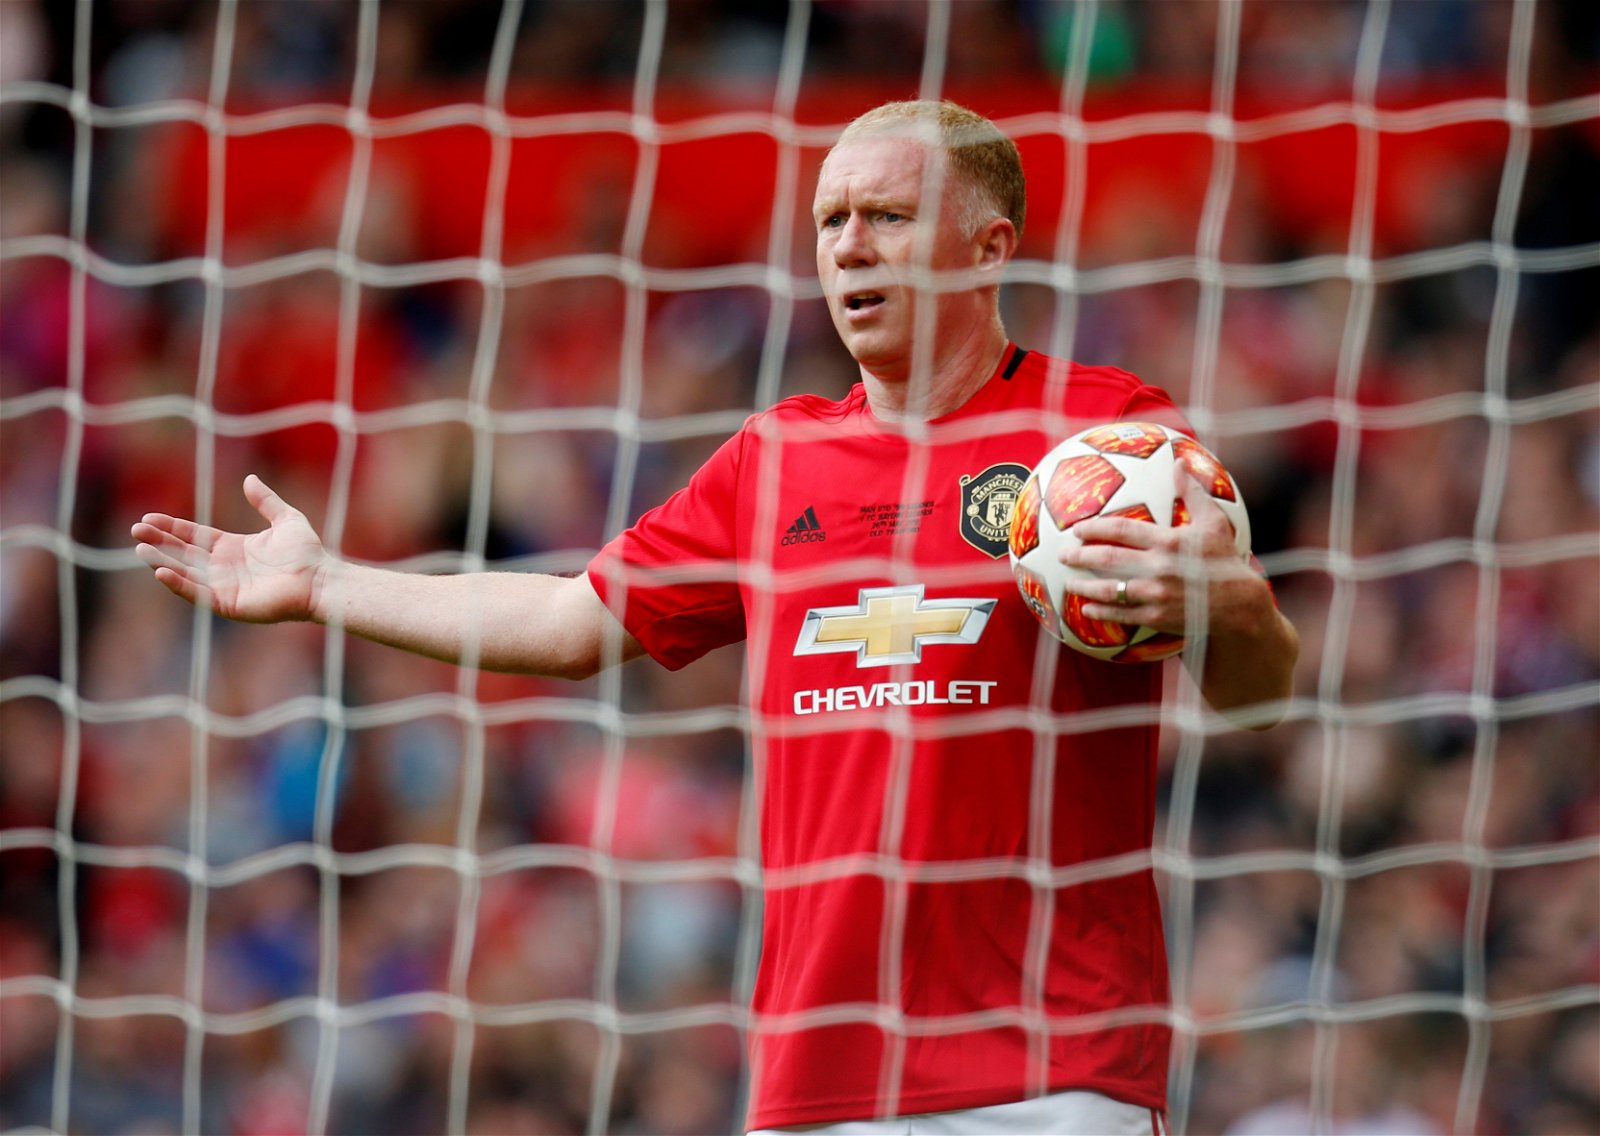 Scholes has a Christmas shopping list for United